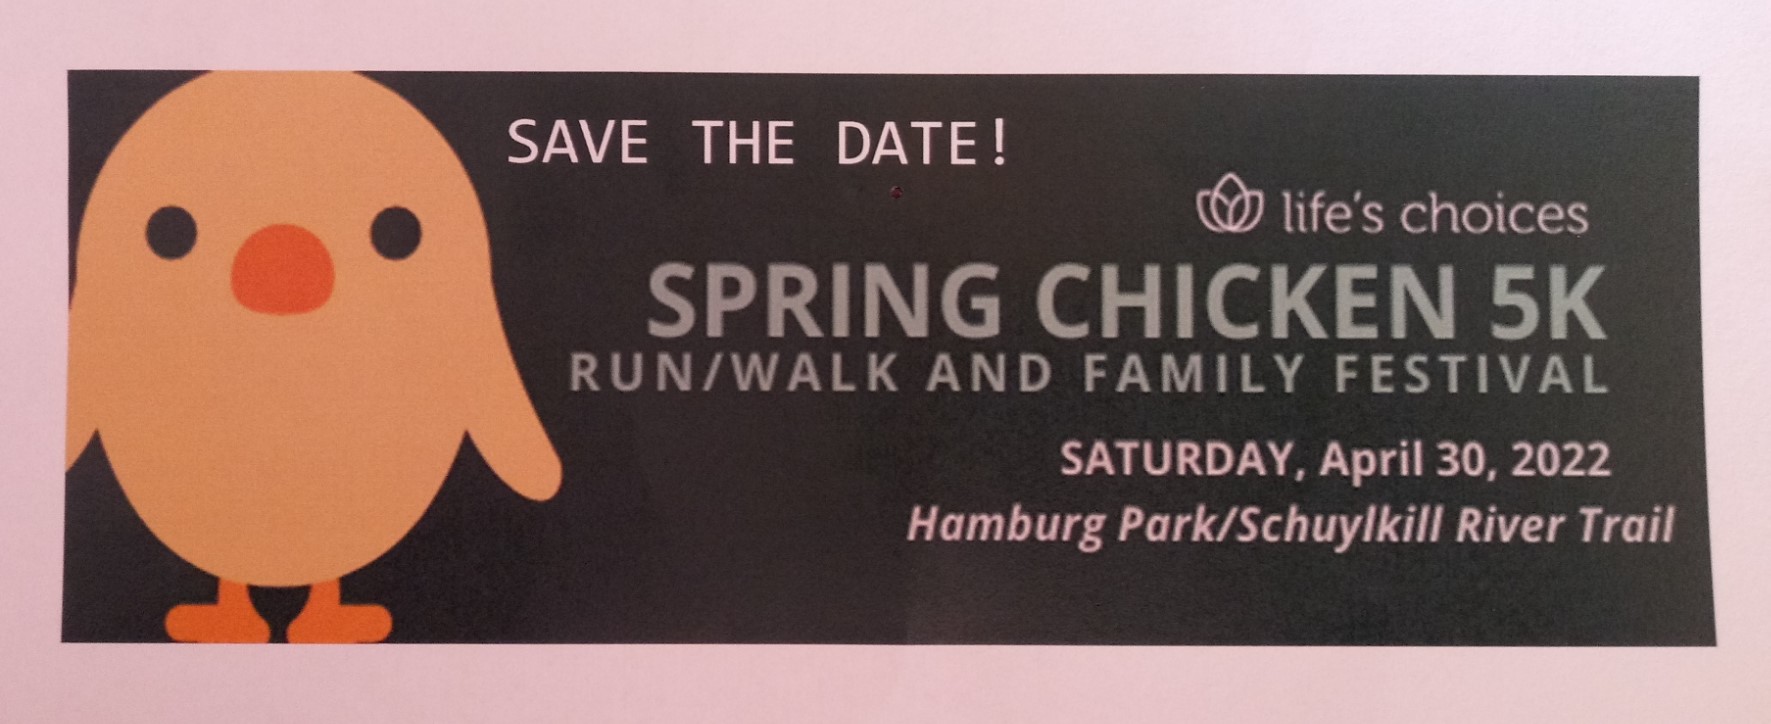 life's choices spring chicken 5k annual fundraiser event be active